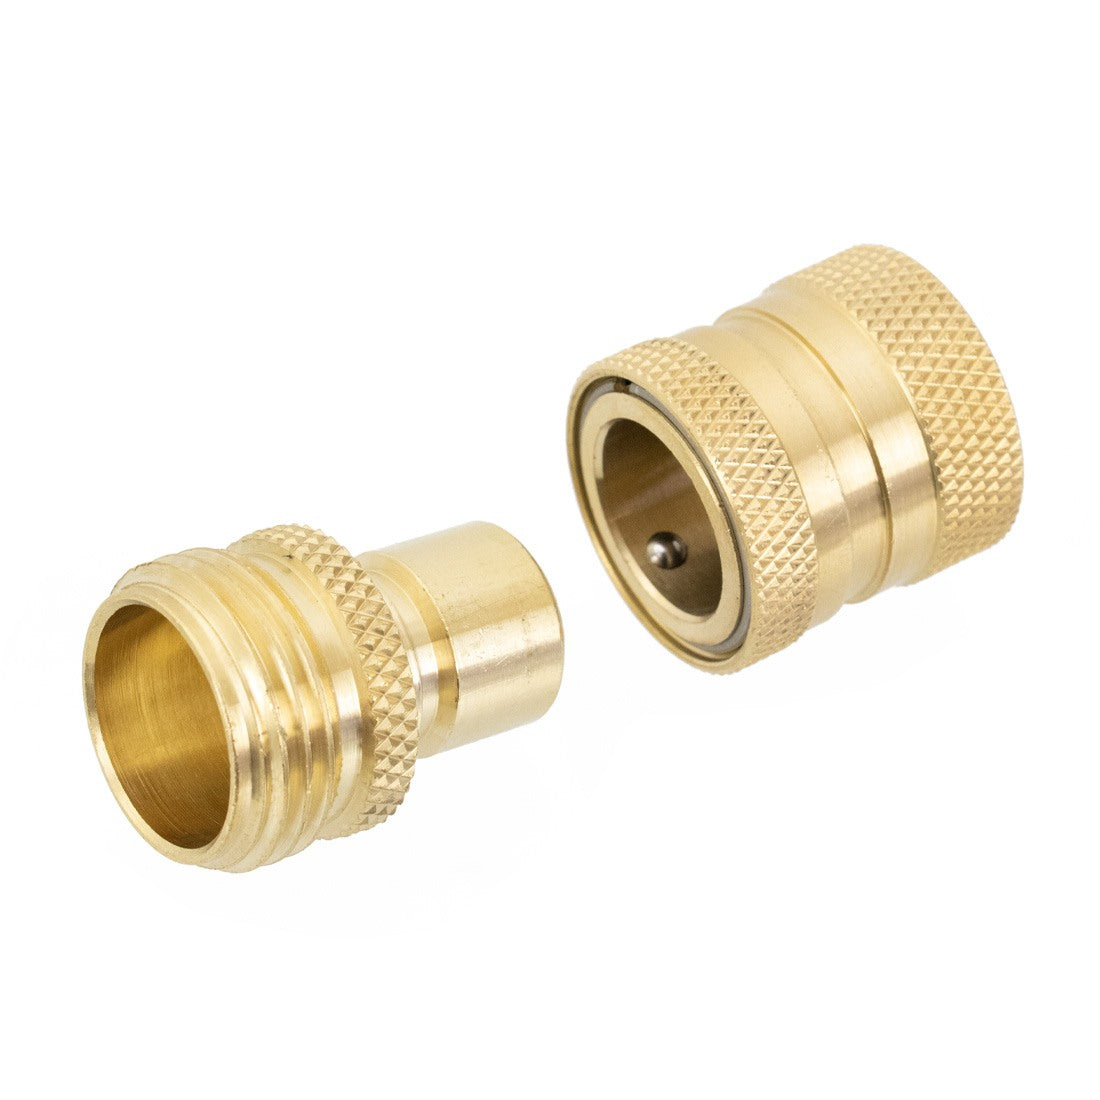 Garden Hose Quick Connect Male and Female Set - Brass - Disassembled Female (Right) Male (Left) View